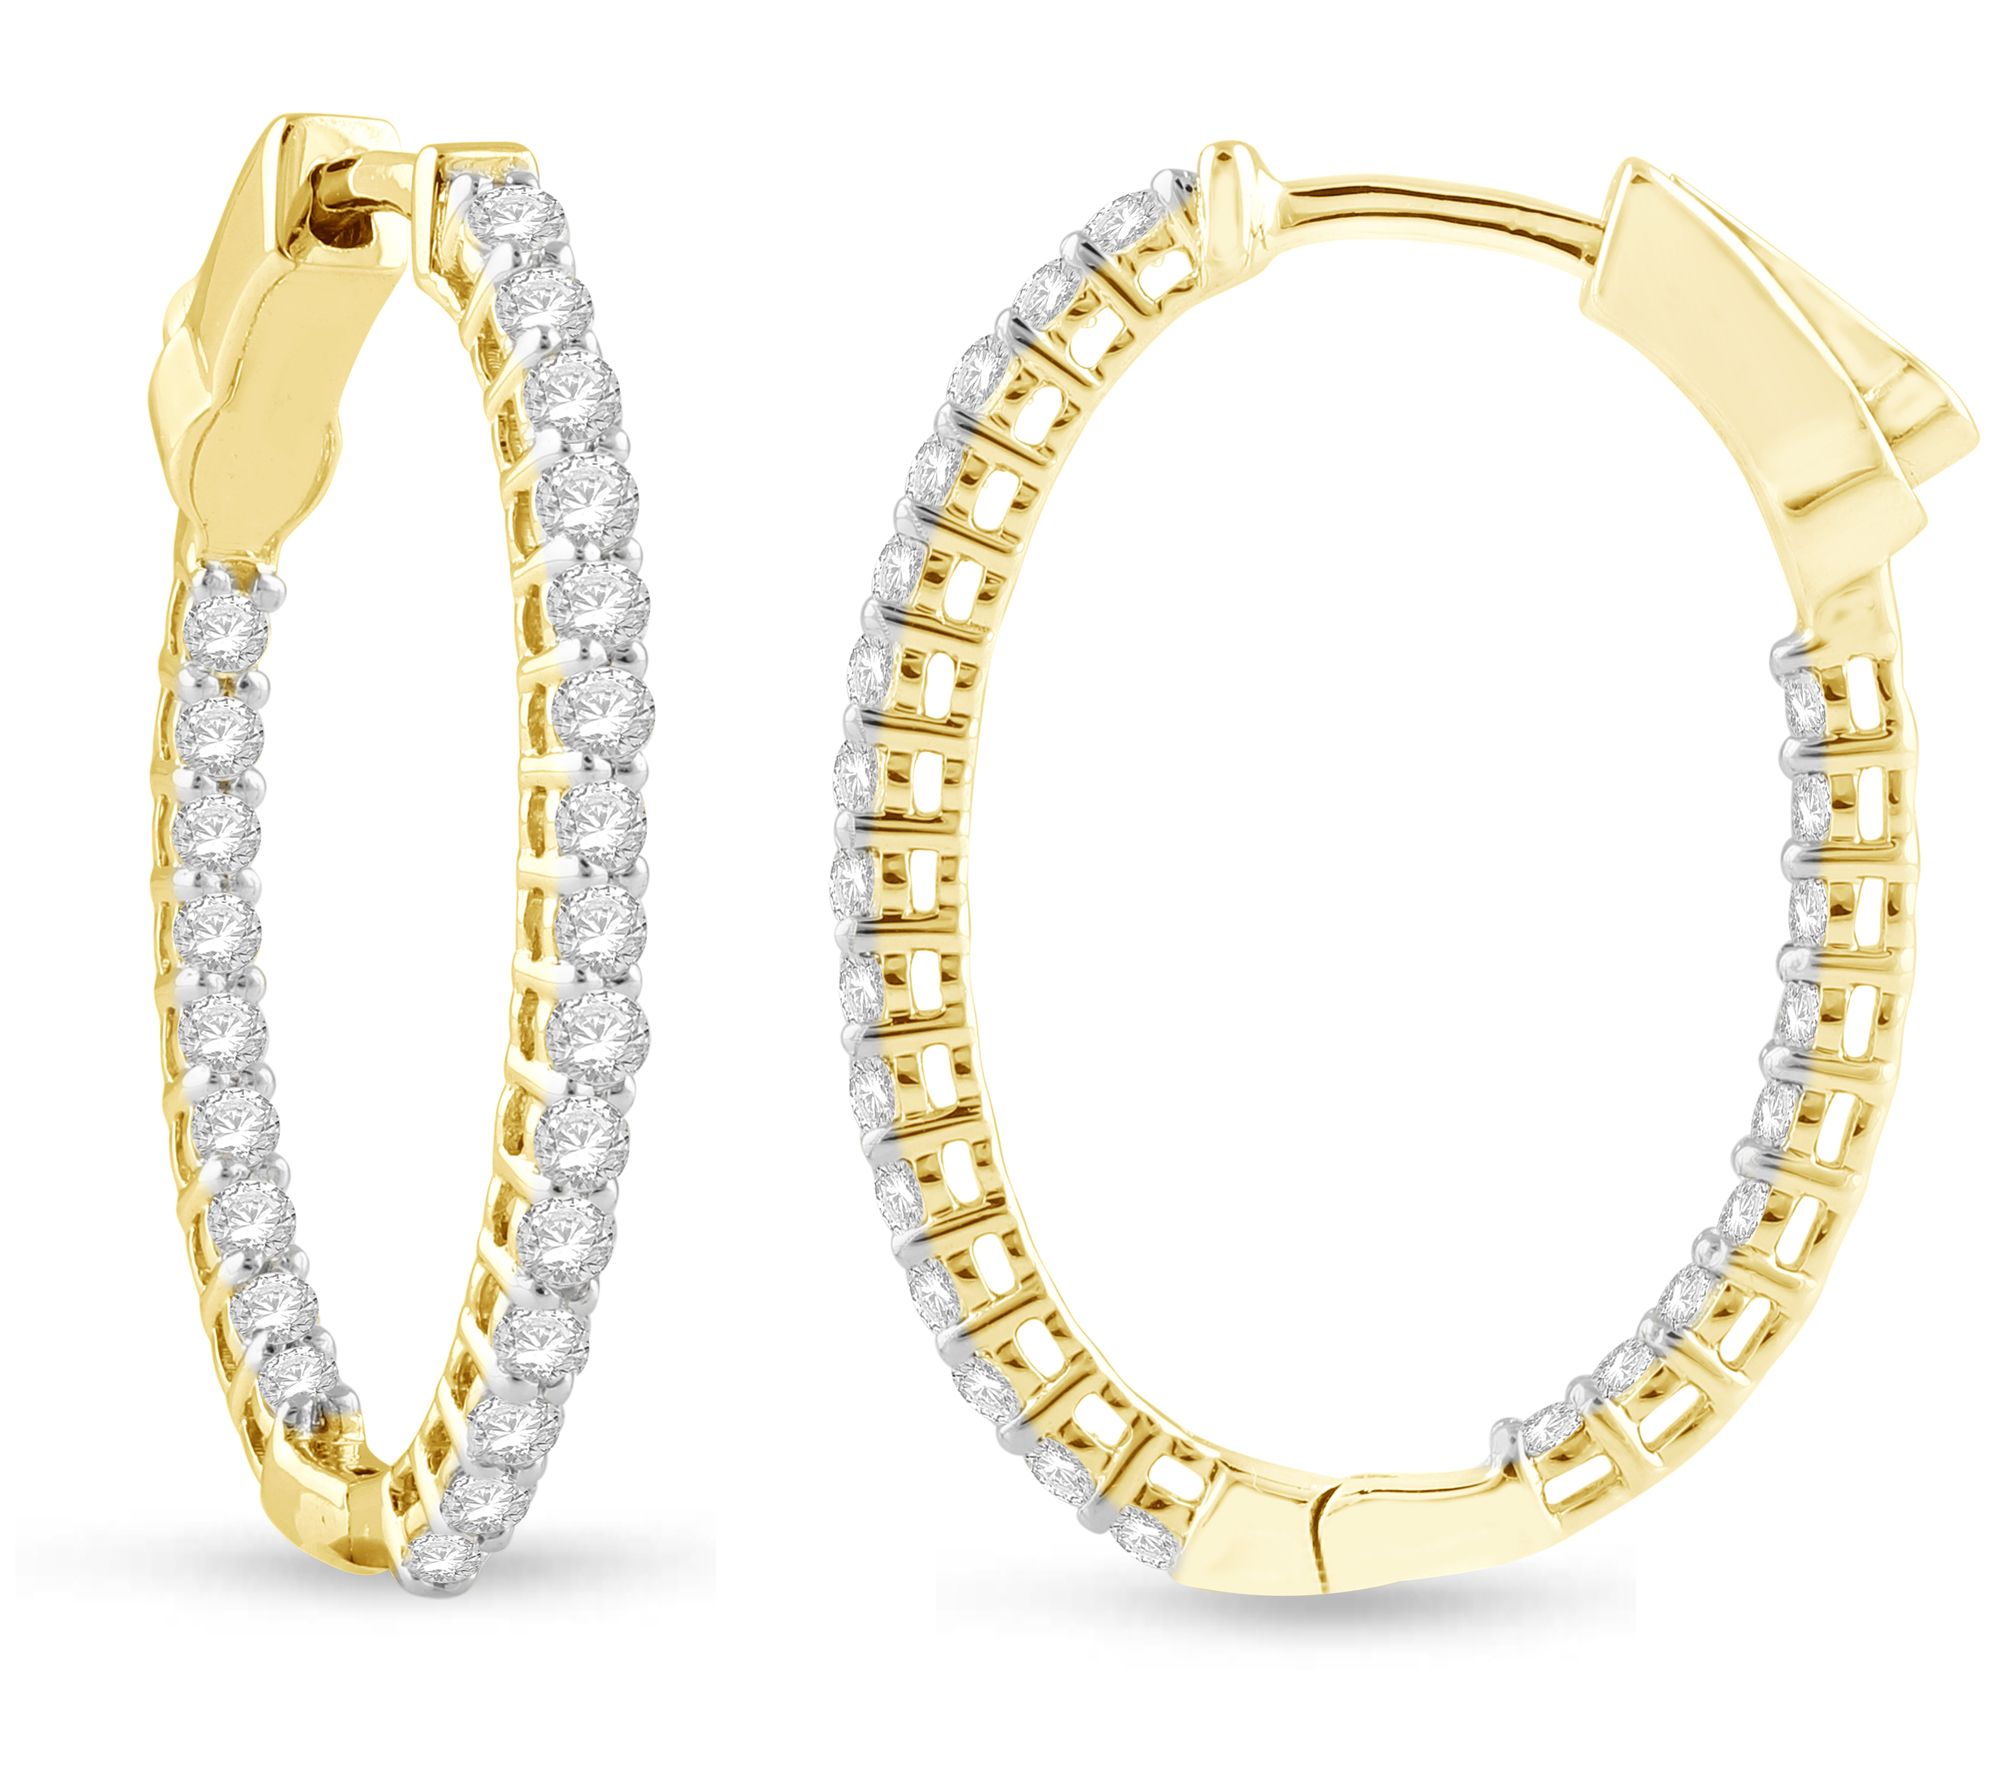 Affinity 1.00 cttw Diamond Inside Out Hoop Earrings, 14K Gold - QVC.com